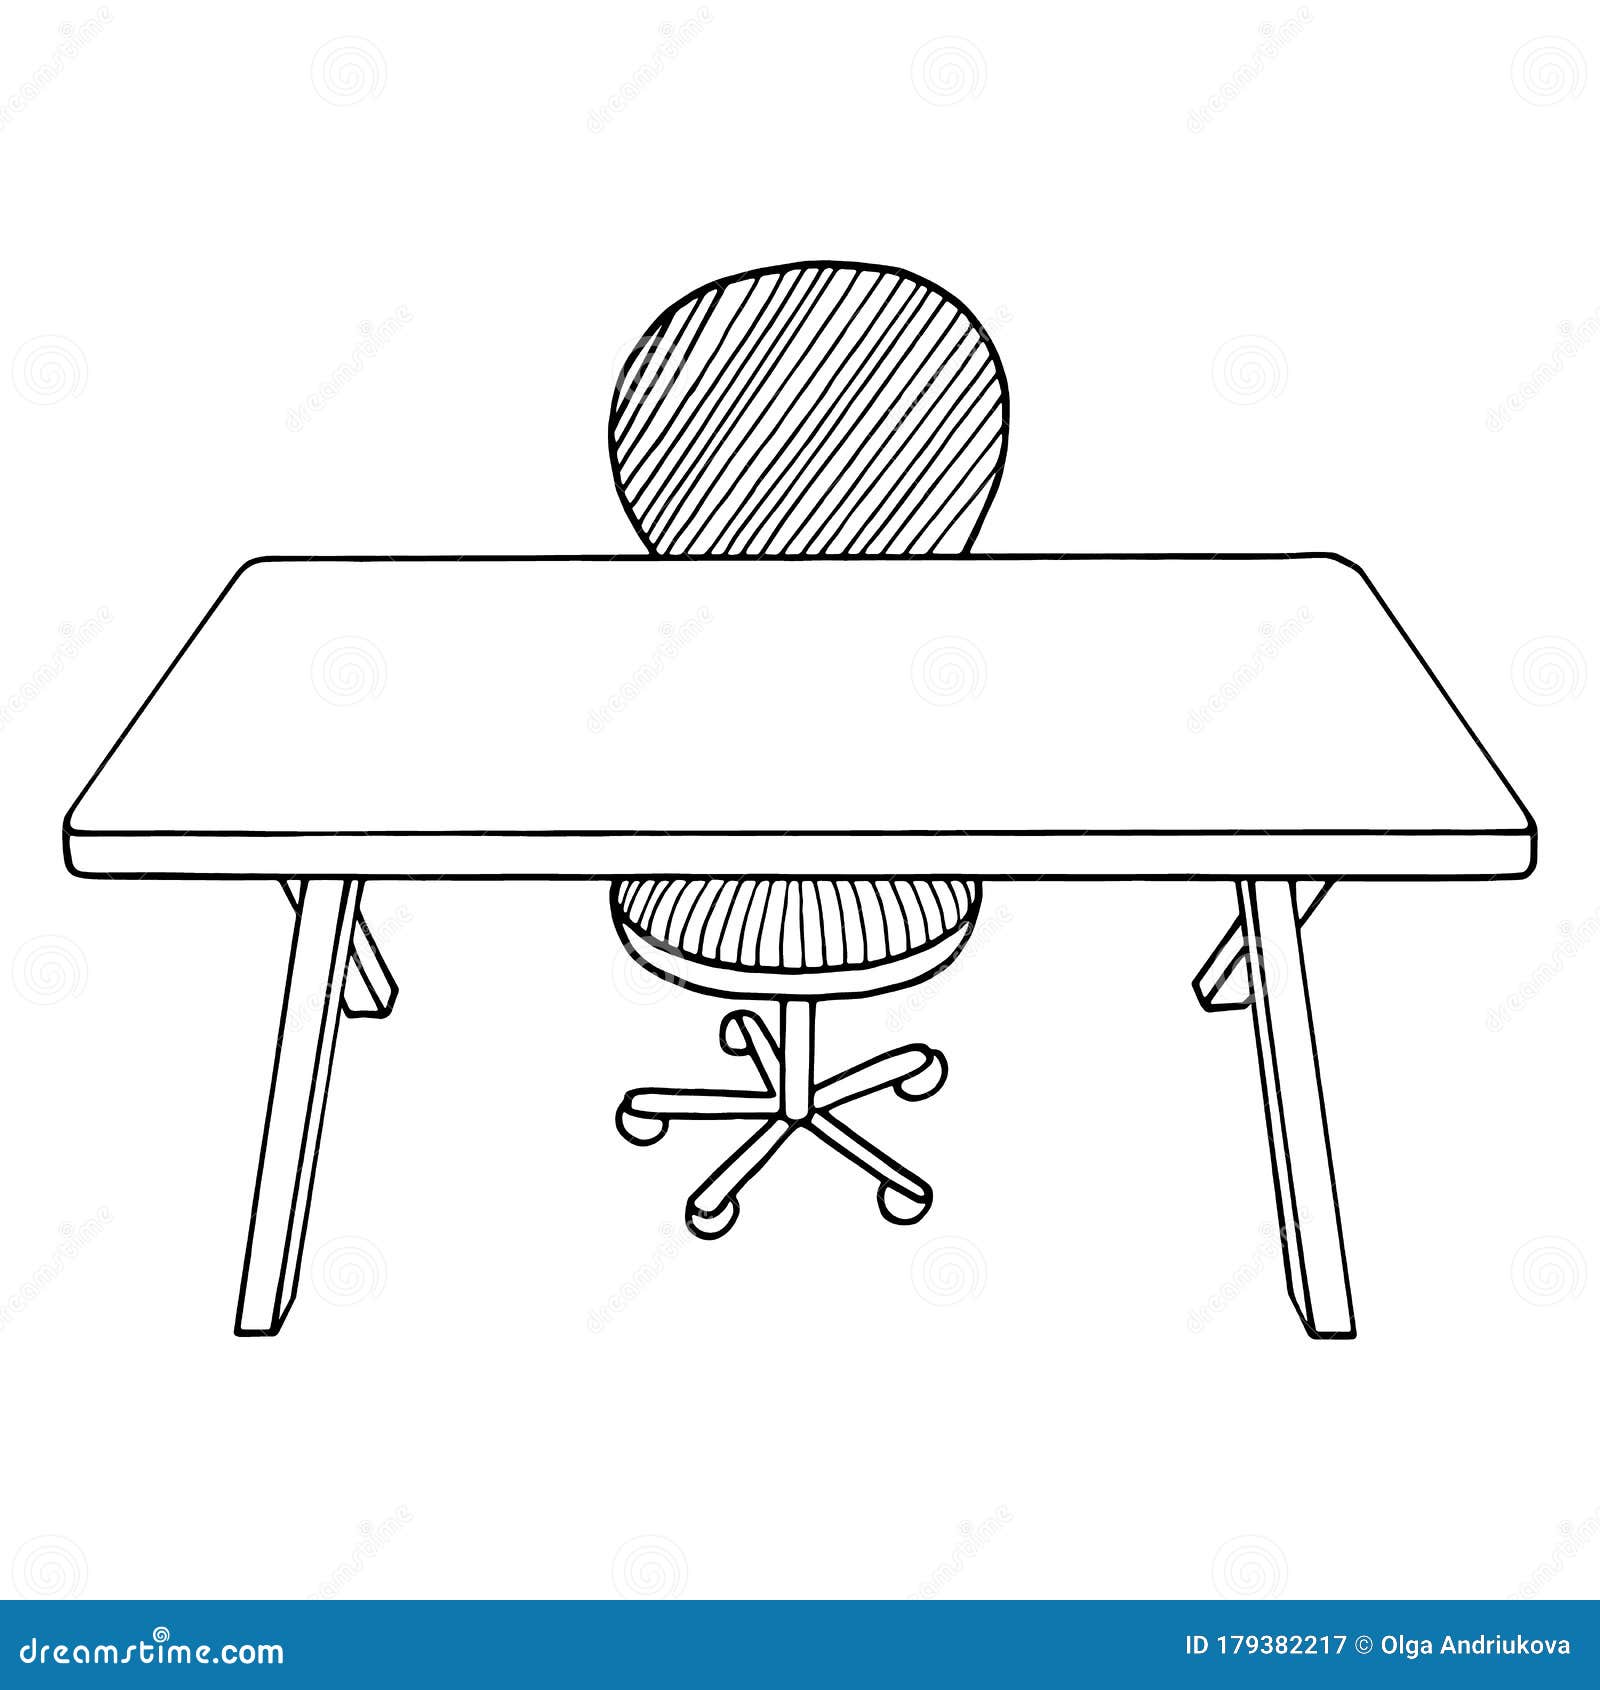 Restaurant Furniture Hd Transparent, Restaurant Furniture Table And Chairs,  Table Clipart, Seat, Table PNG Image For Free Download